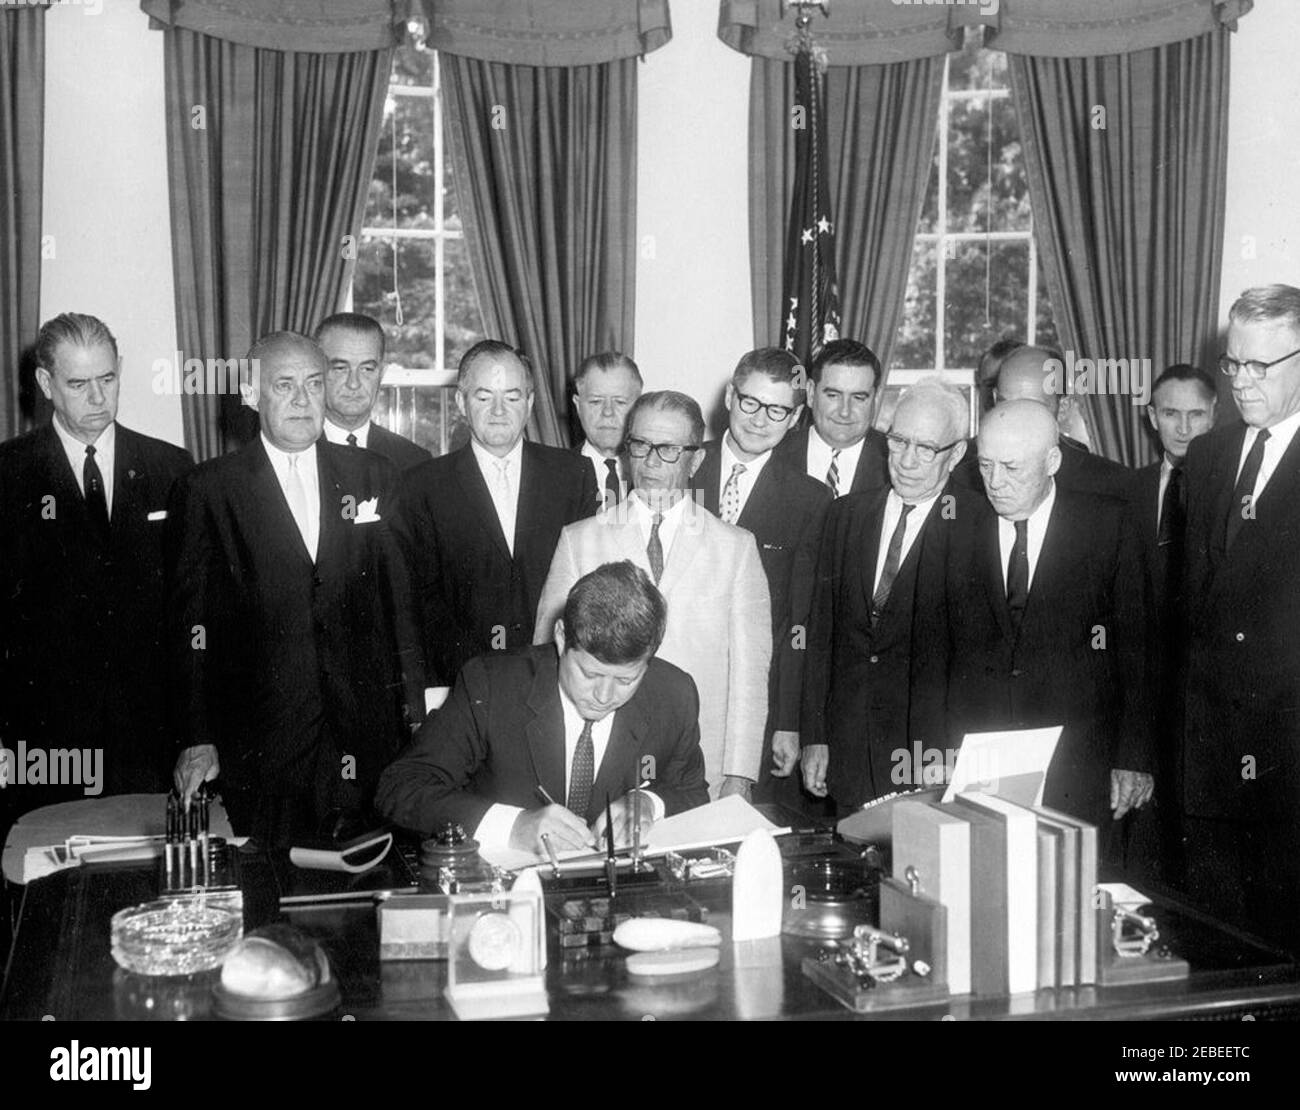 Bill signing, S. 1643 Public Law 87-128, Agricultural Act of 1961, 9:45 AM. President John F. Kennedy signs S. 1643, the Agricultural Act of 1961. The bill was legislated to improve farm income, expand the market for agricultural products, and reduce stocks of grains and wheat. Standing behind President Kennedy are (L-R): Senator Olin Johnston of South Carolina; Representative Harold D. Cooley of North Carolina; Vice President Lyndon B. Johnson; Senator Hubert Humphrey of Minnesota; Representative W.R. Poage of Texas; Senator Allen Ellender of Louisiana (white suit); Secretary of Agriculture O Stock Photo